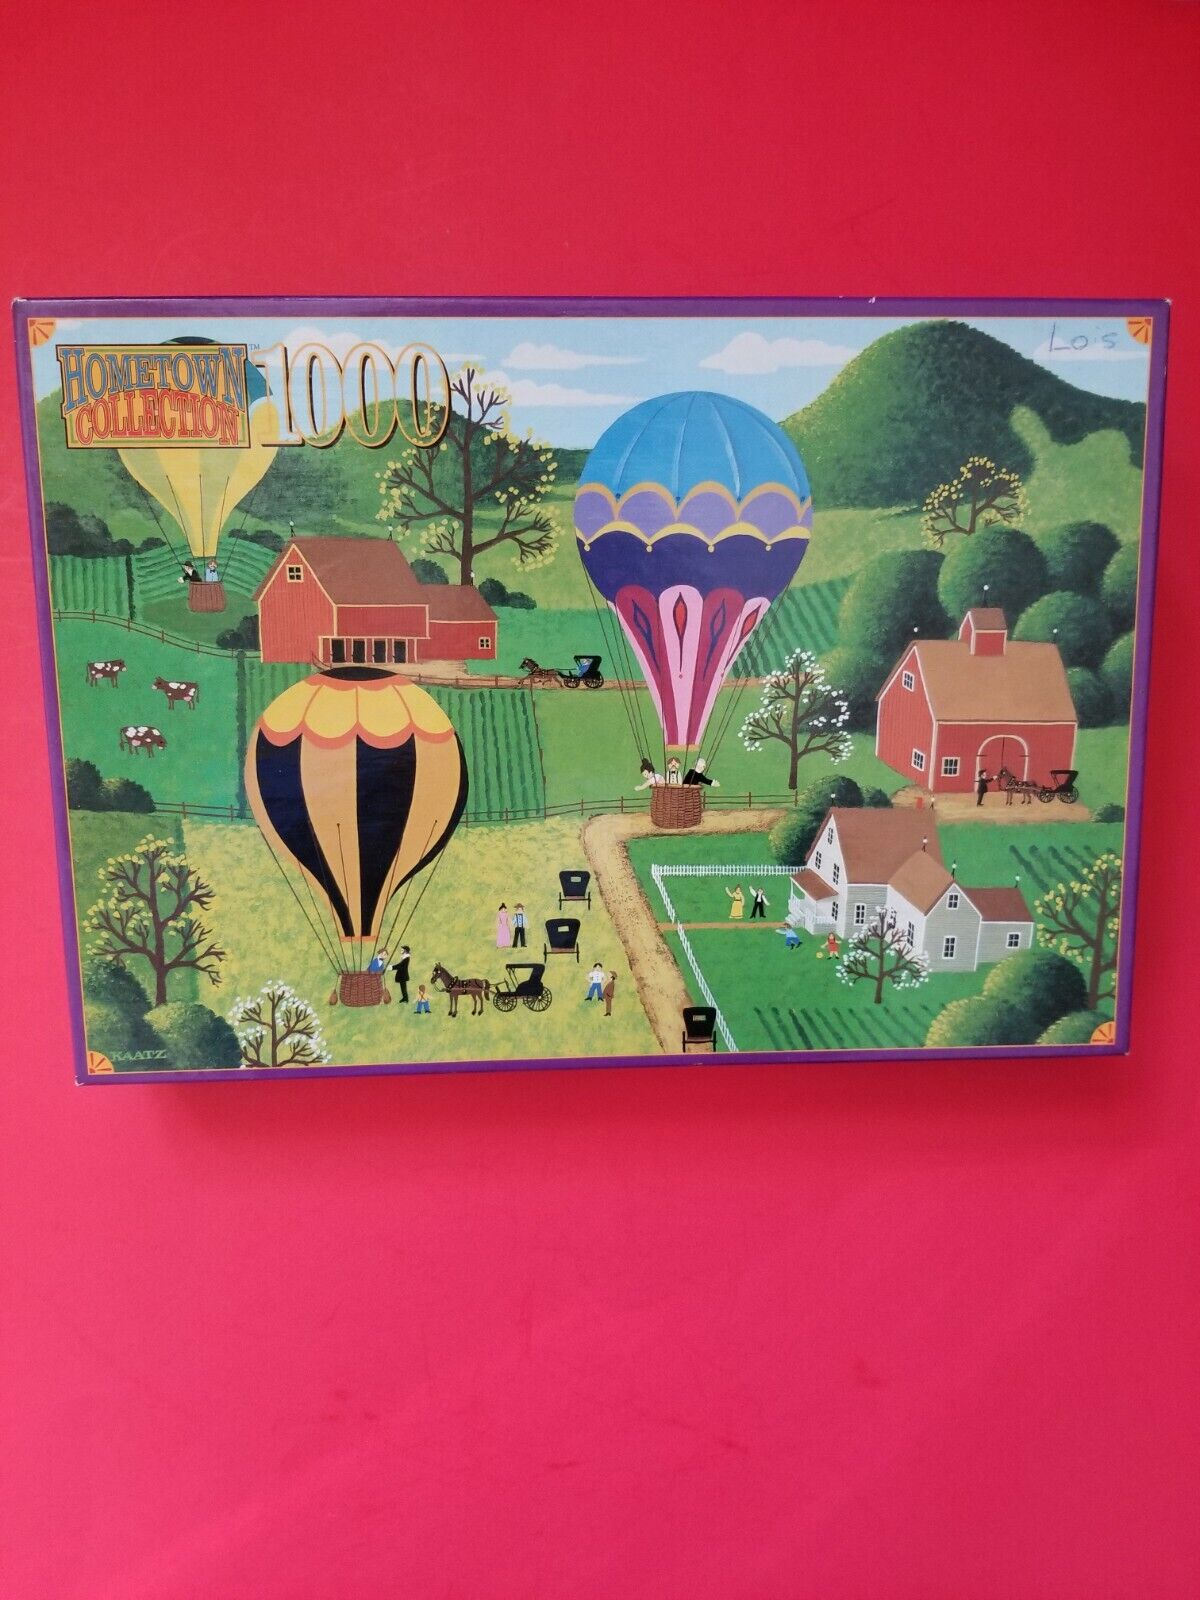 ROSEART HOMETOWN COLLECTION 1000 Piece Com Max 77% OFF Max 76% OFF Ride” “Balloon Puzzle